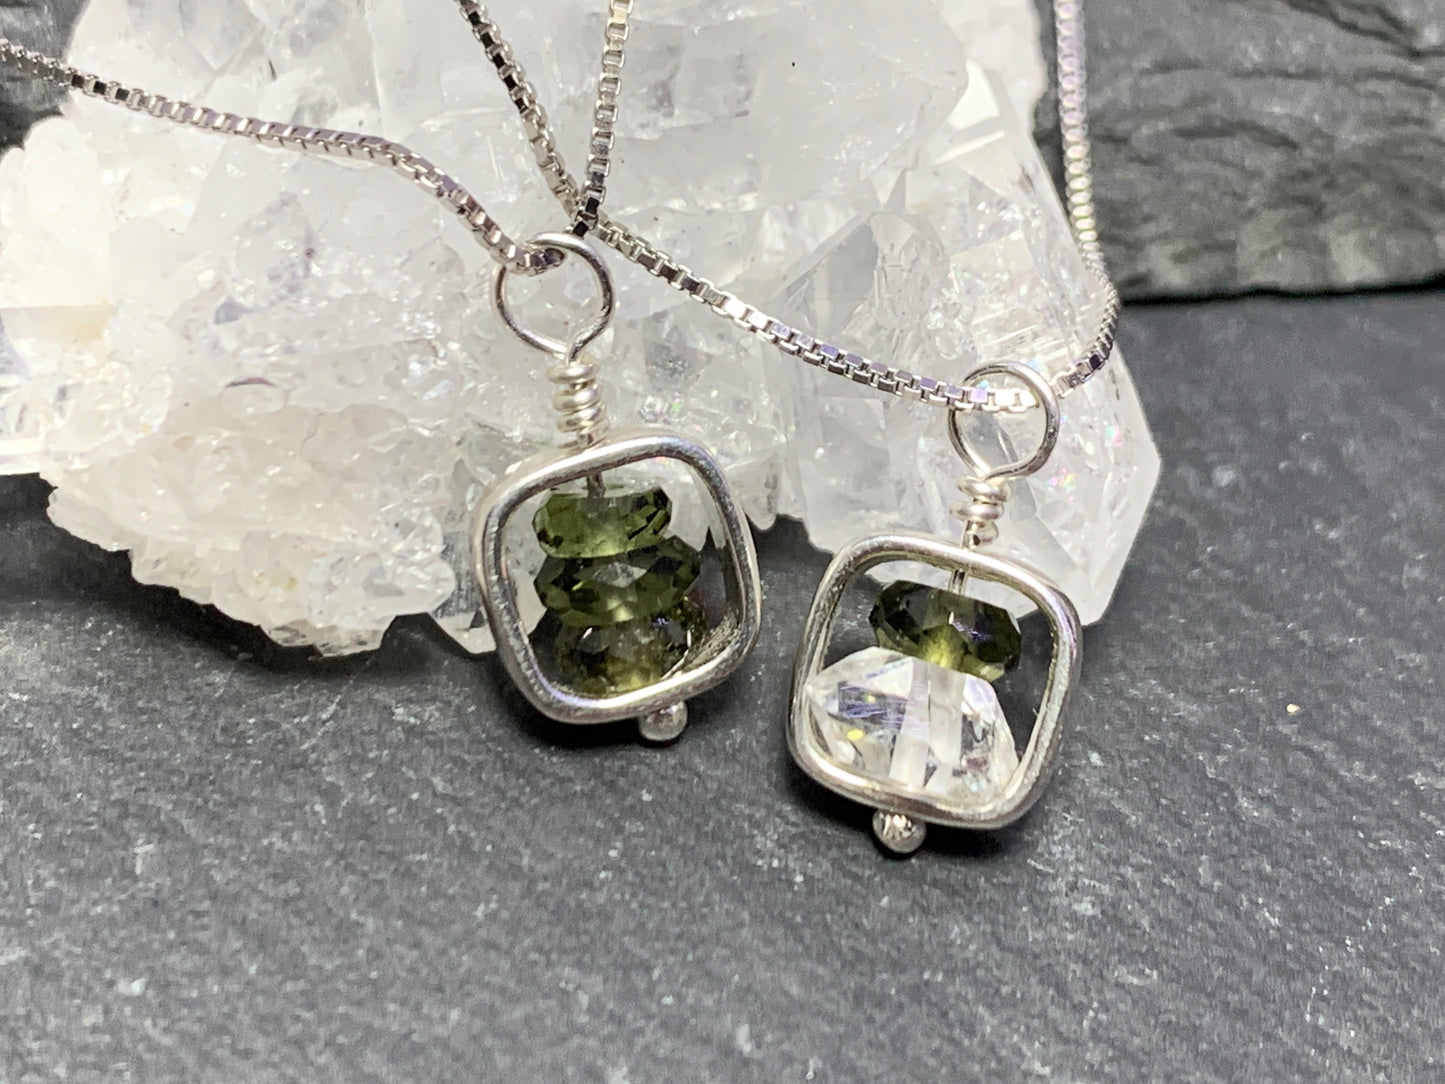 Pendant with Moldavite and Herkimer beads